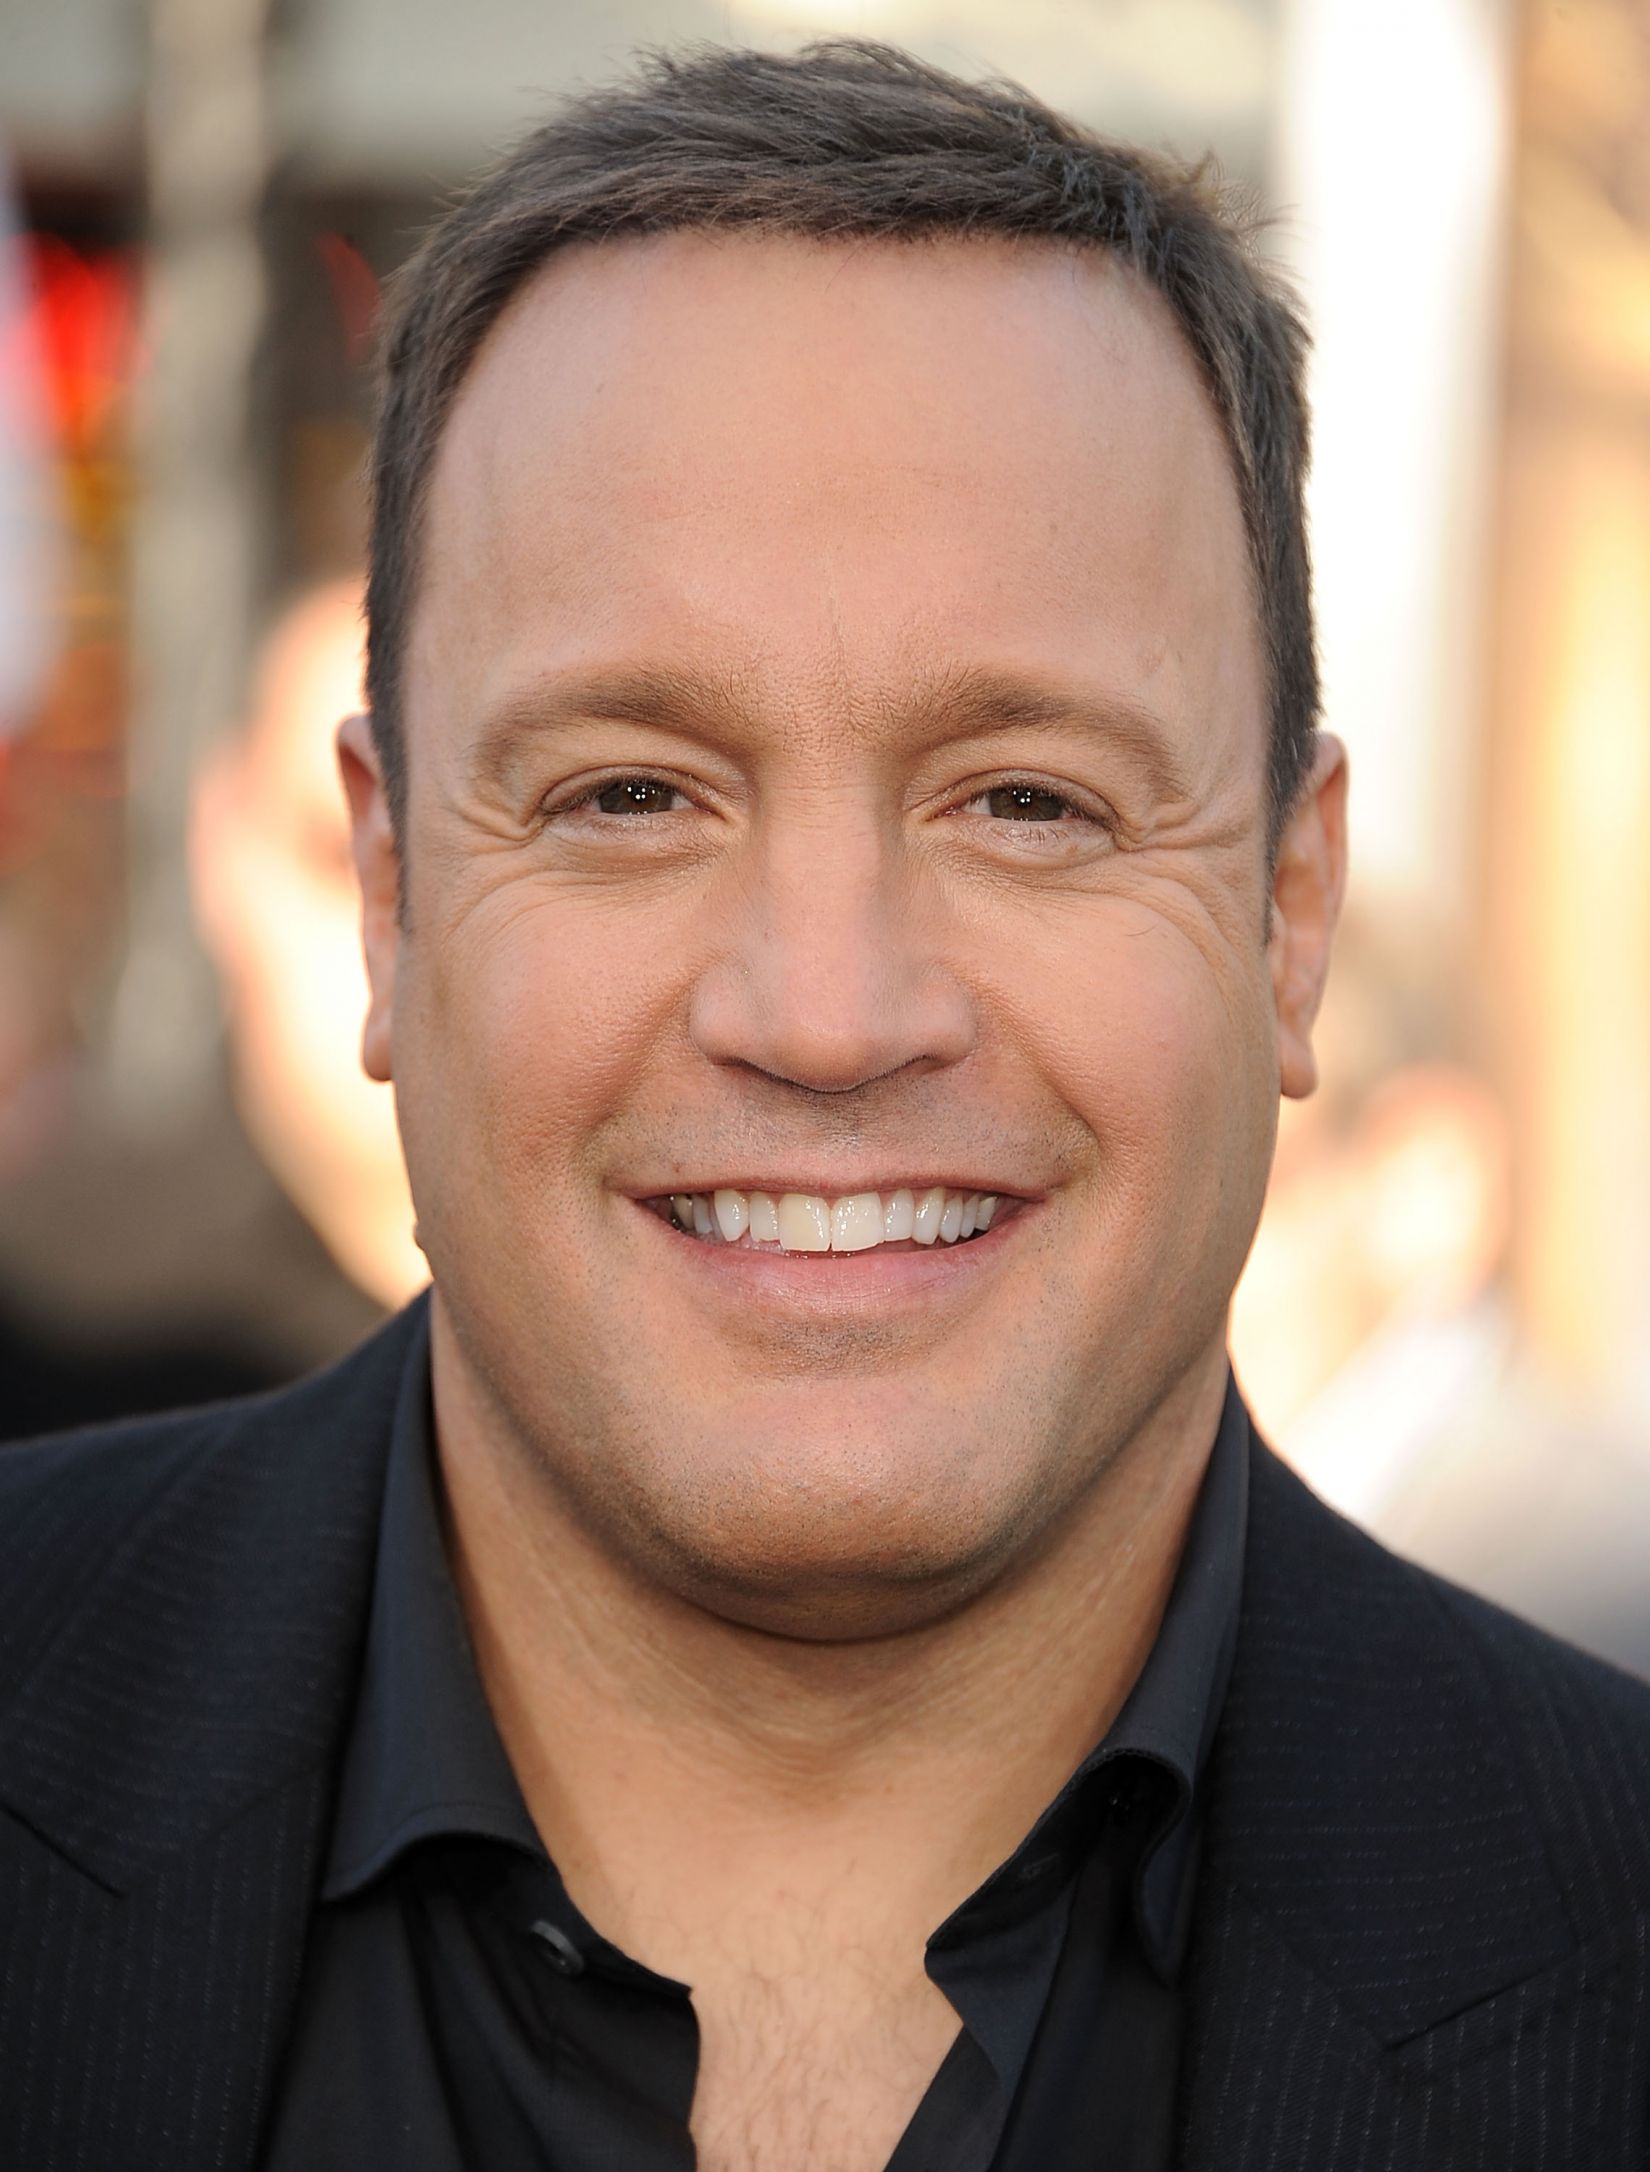 kevin-james-approves-blank-template-imgflip